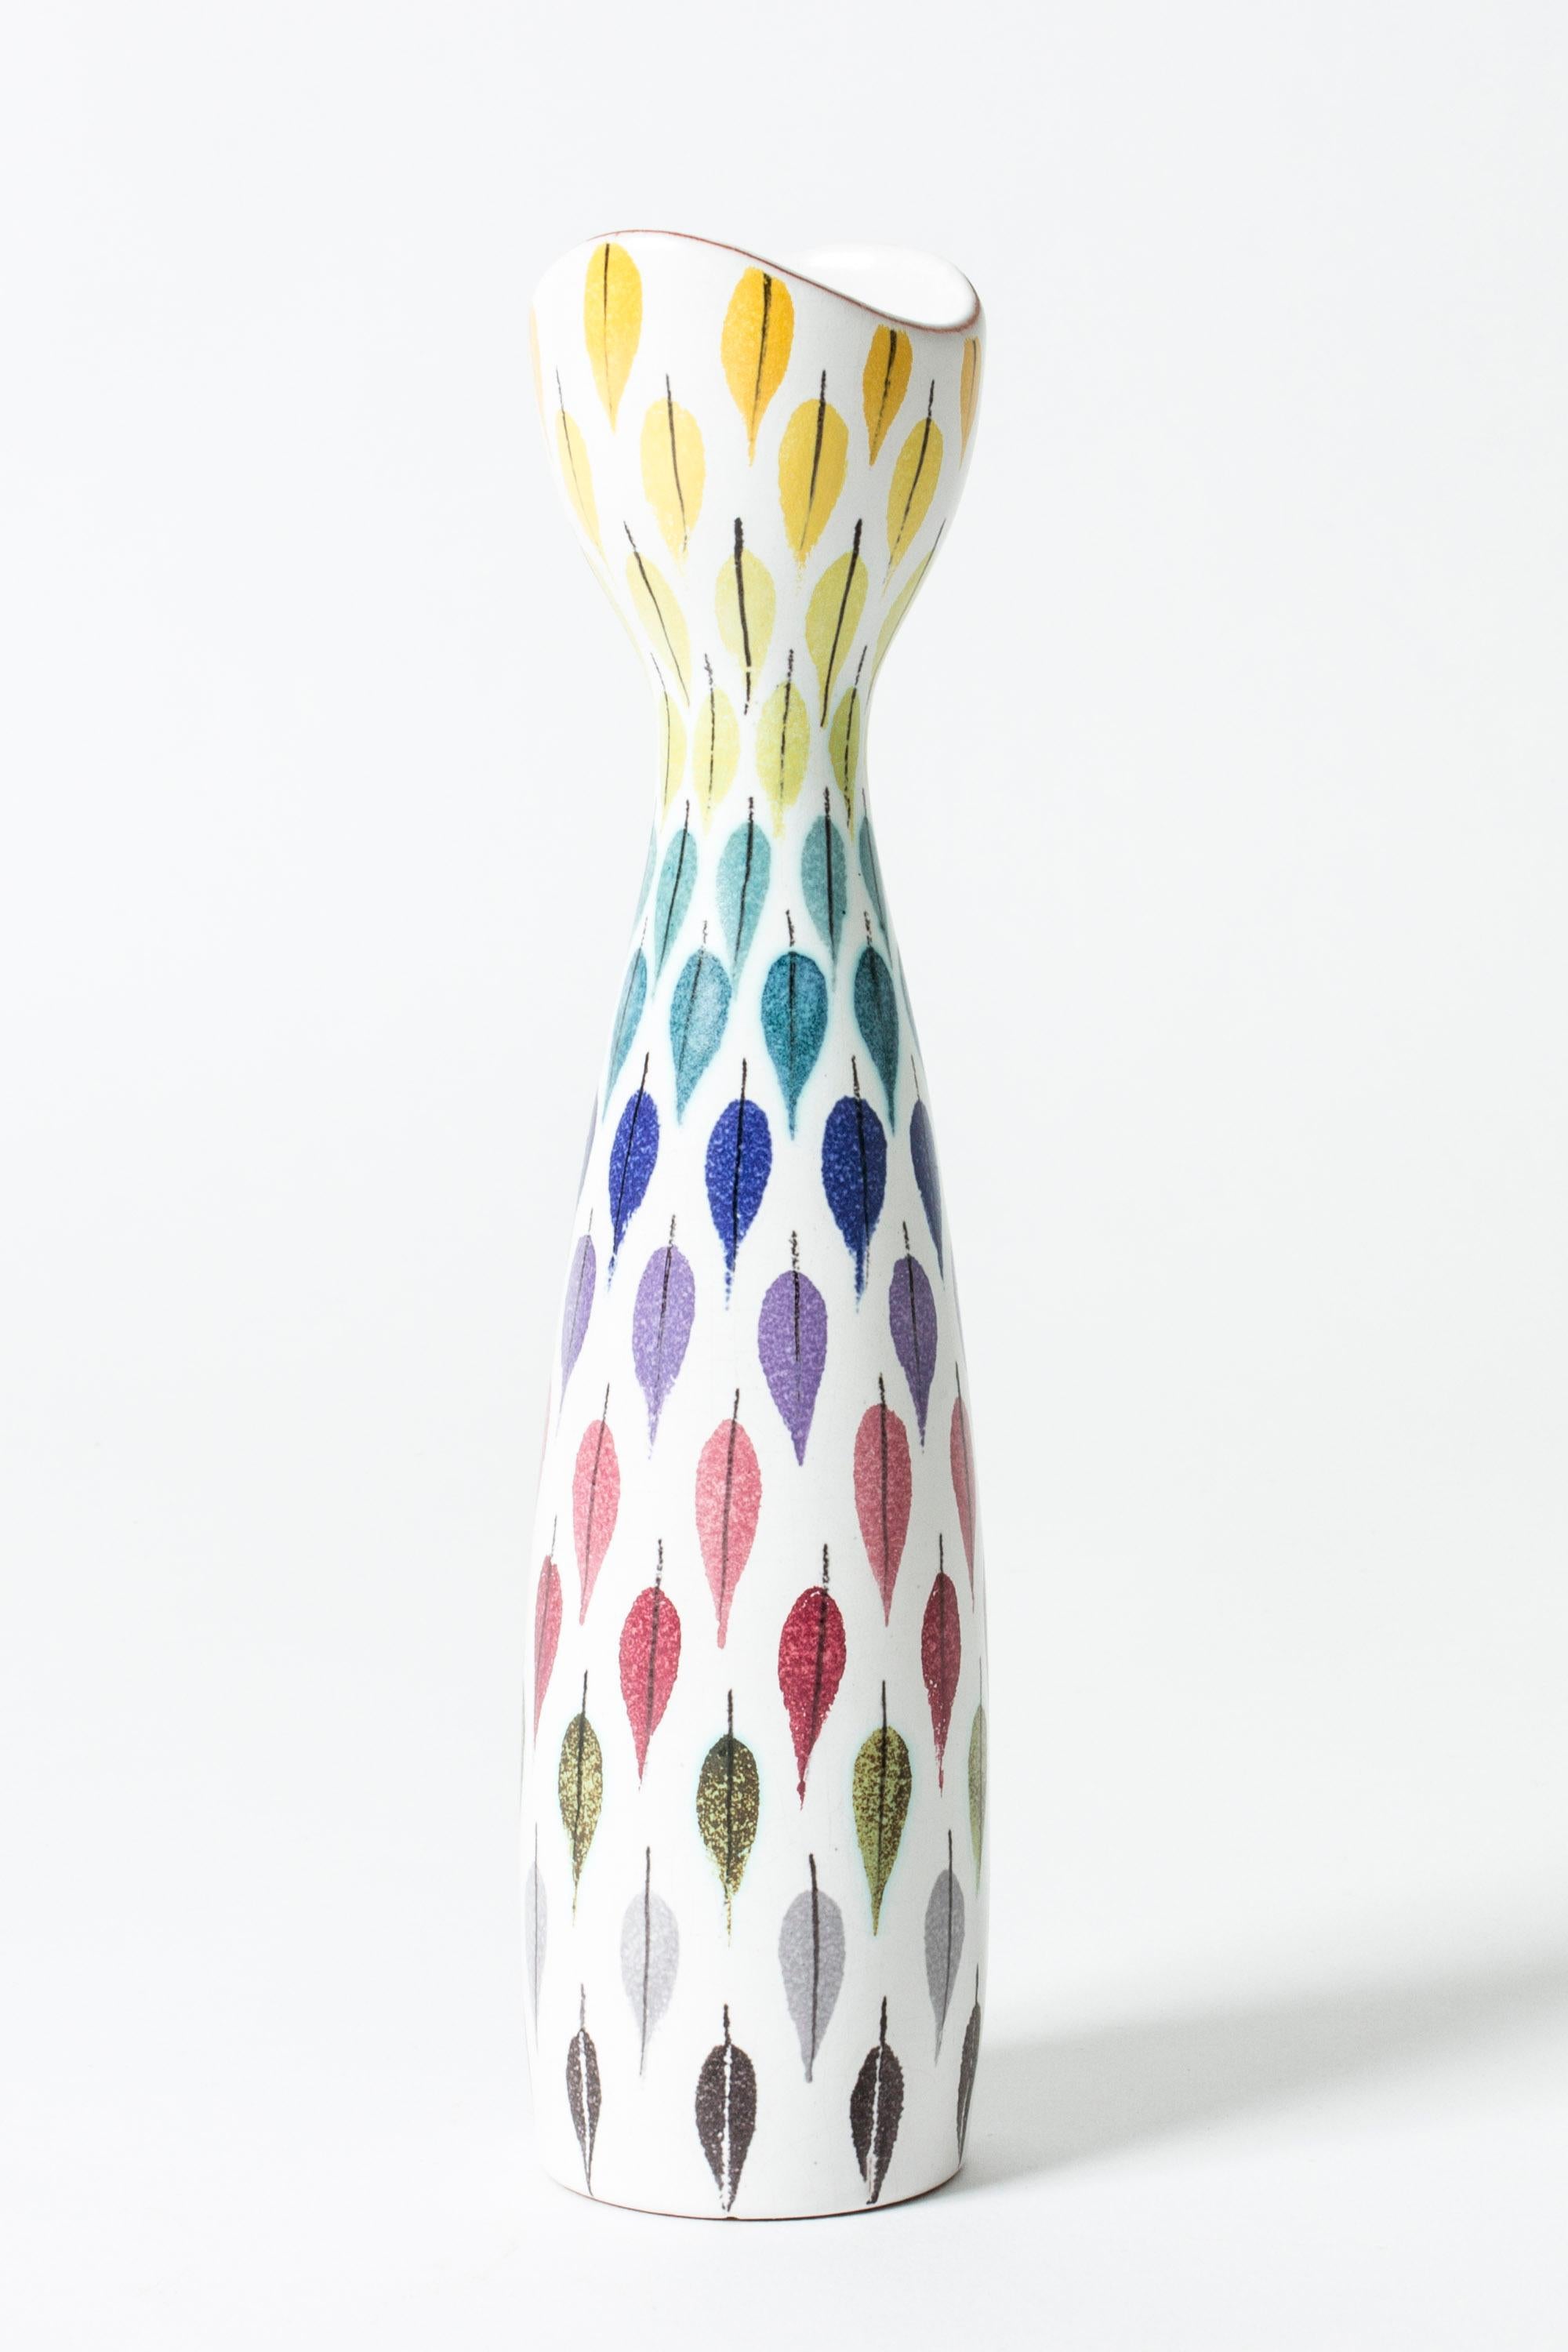 Faience vase by Stig Lindberg in a slender, curved form. Beautiful decor of leaves in vibrant colors.